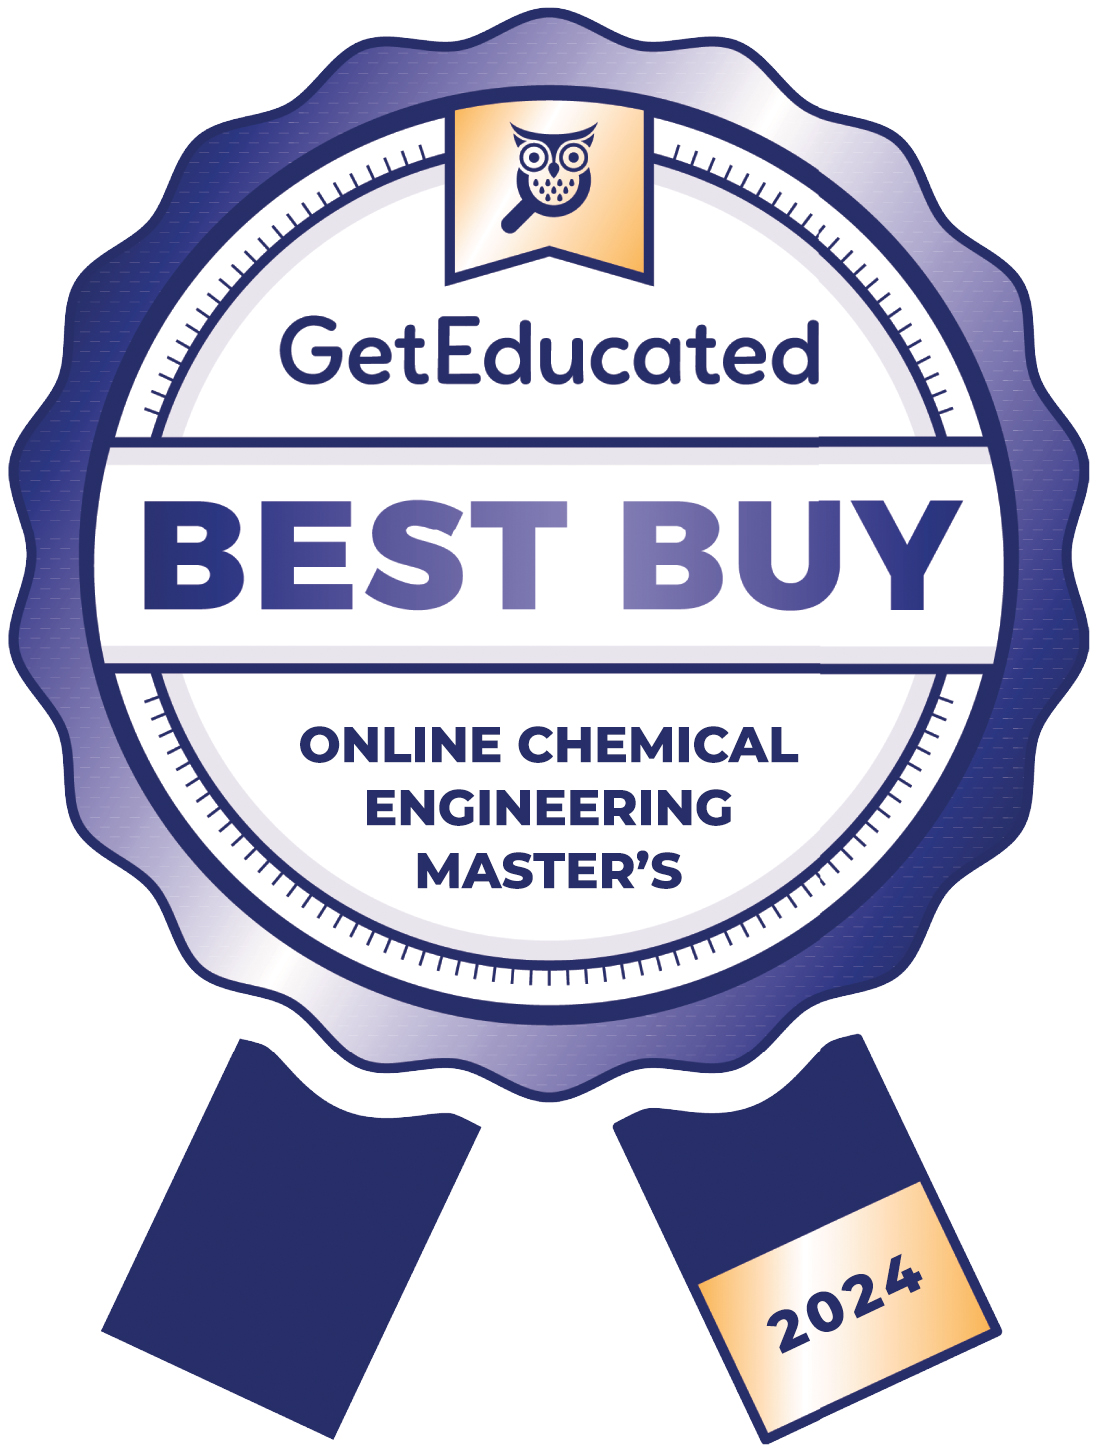 Rankings of the cheapest online chemical engineering master's degrees